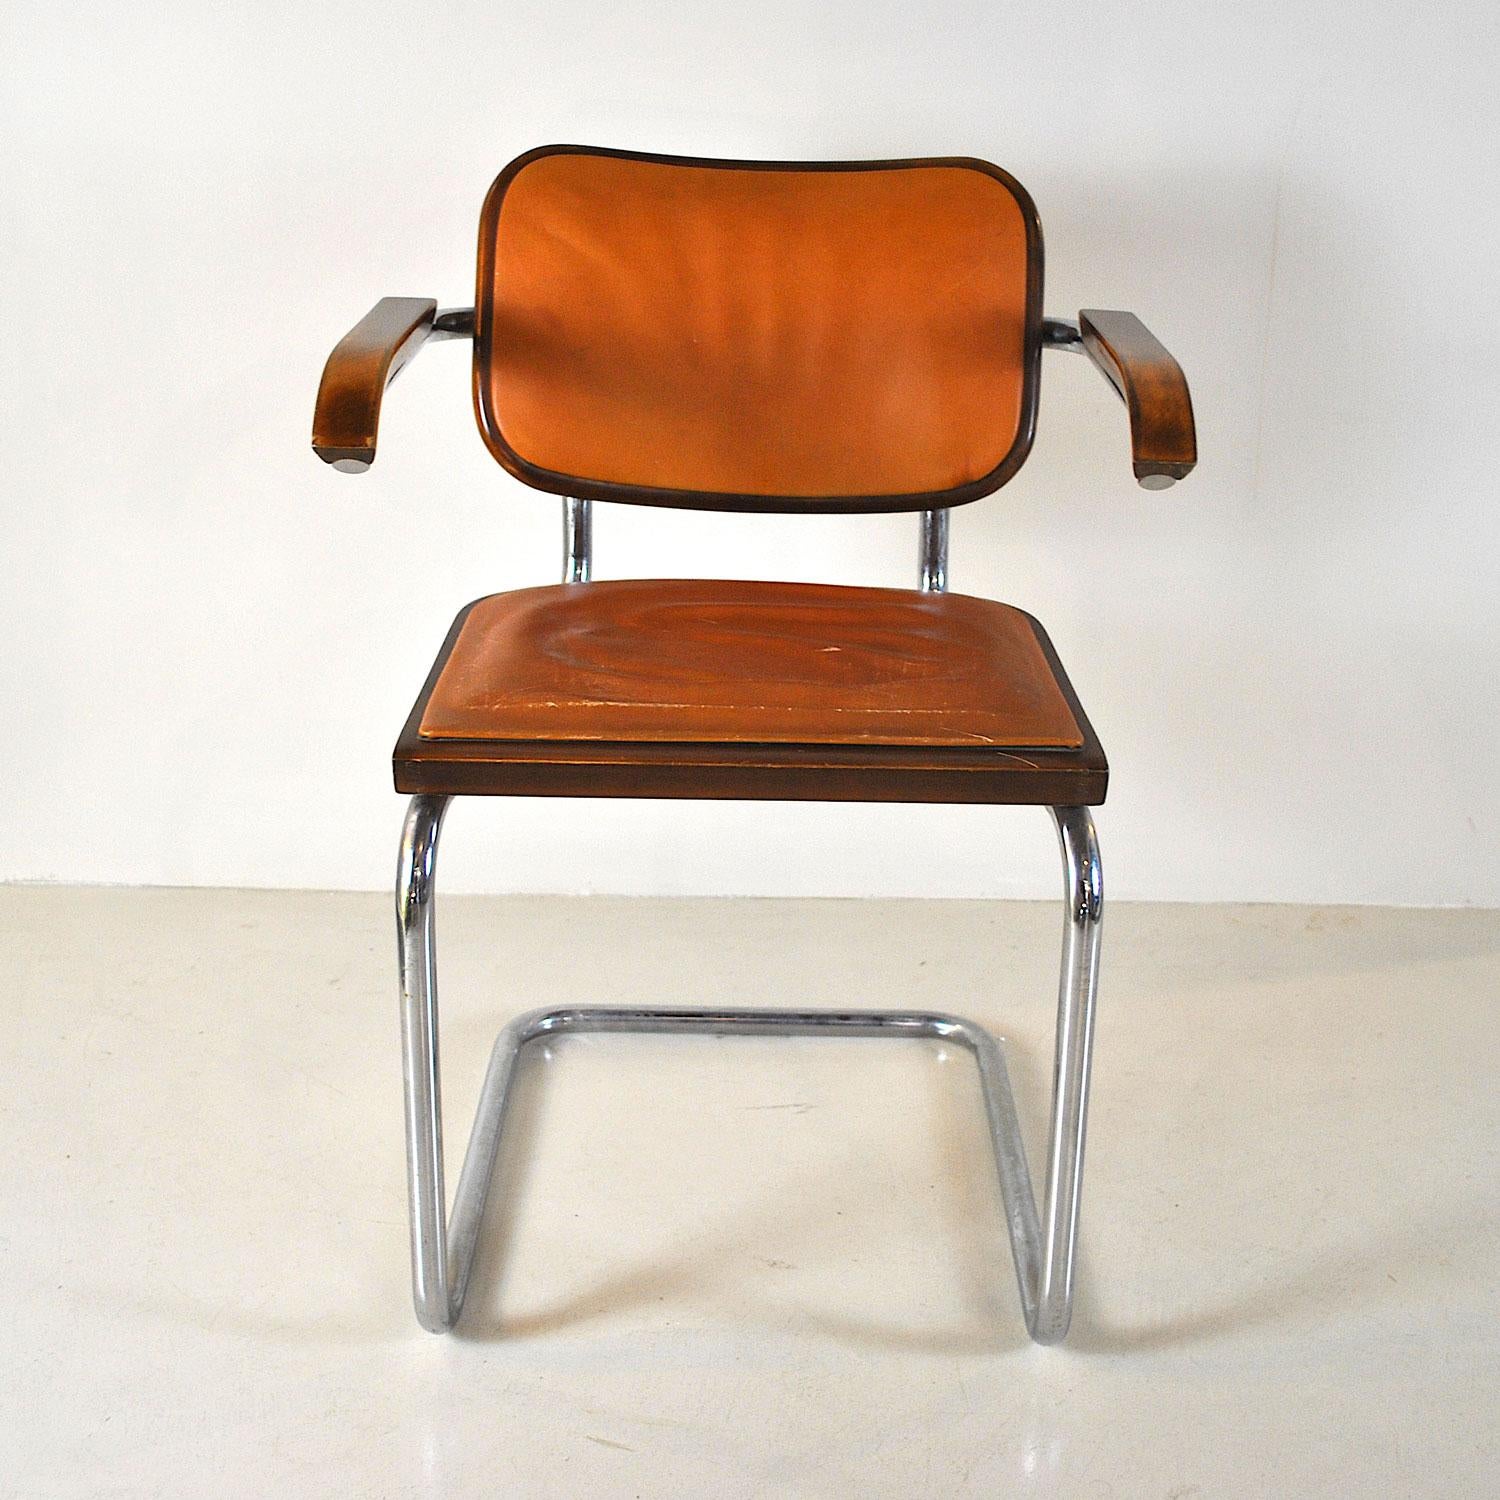 Chair in the style model Cesca S64 by Marcel Breuer from 1960s in wood and oven skin.